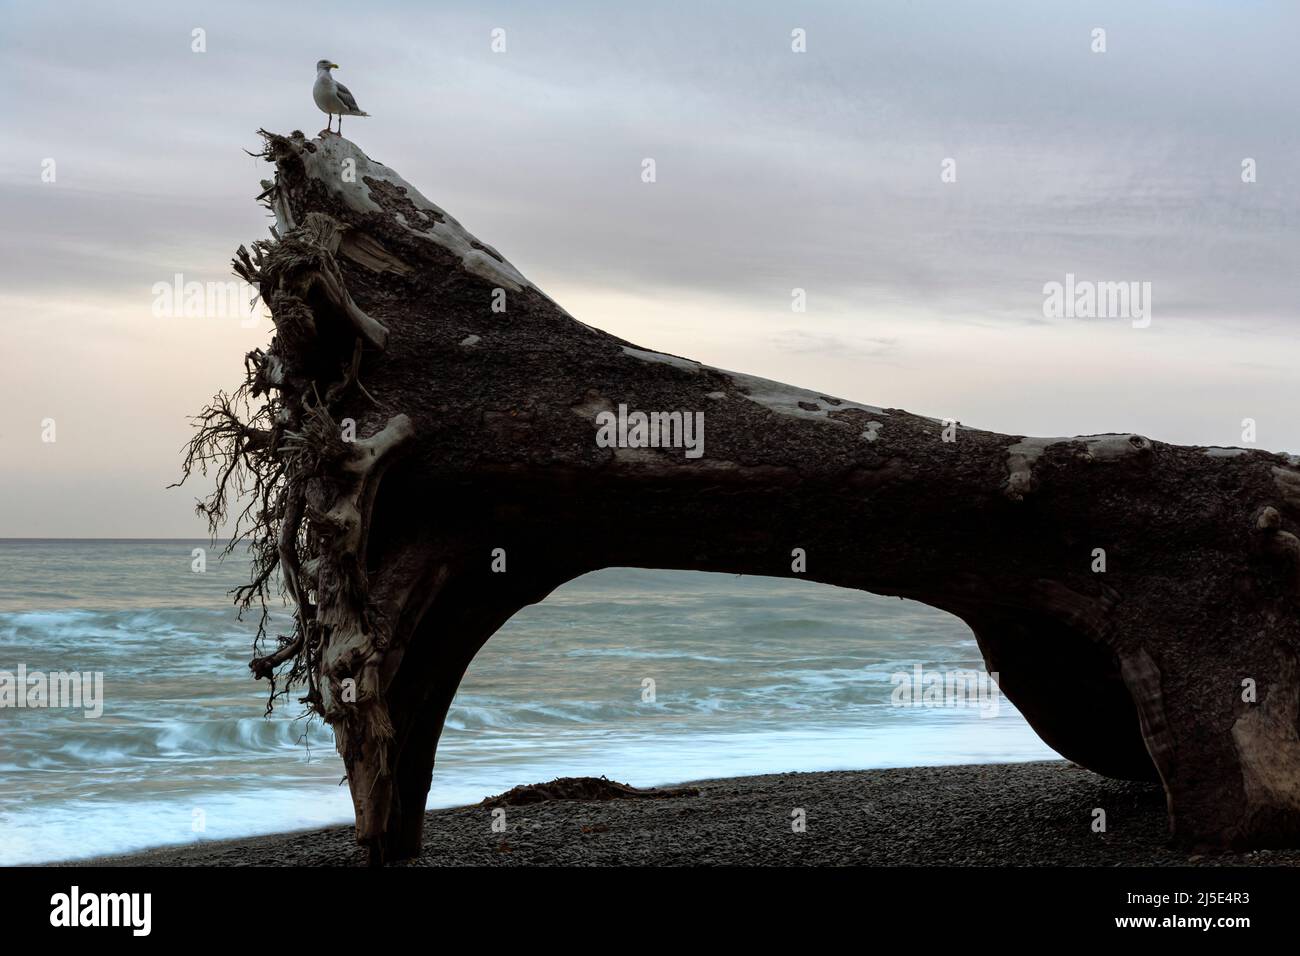 WA21437-00...WASHINGTON - Seagull standing on a massive old tree washed  up on the shores of Rialto Beach in Olympic National Park. Stock Photo